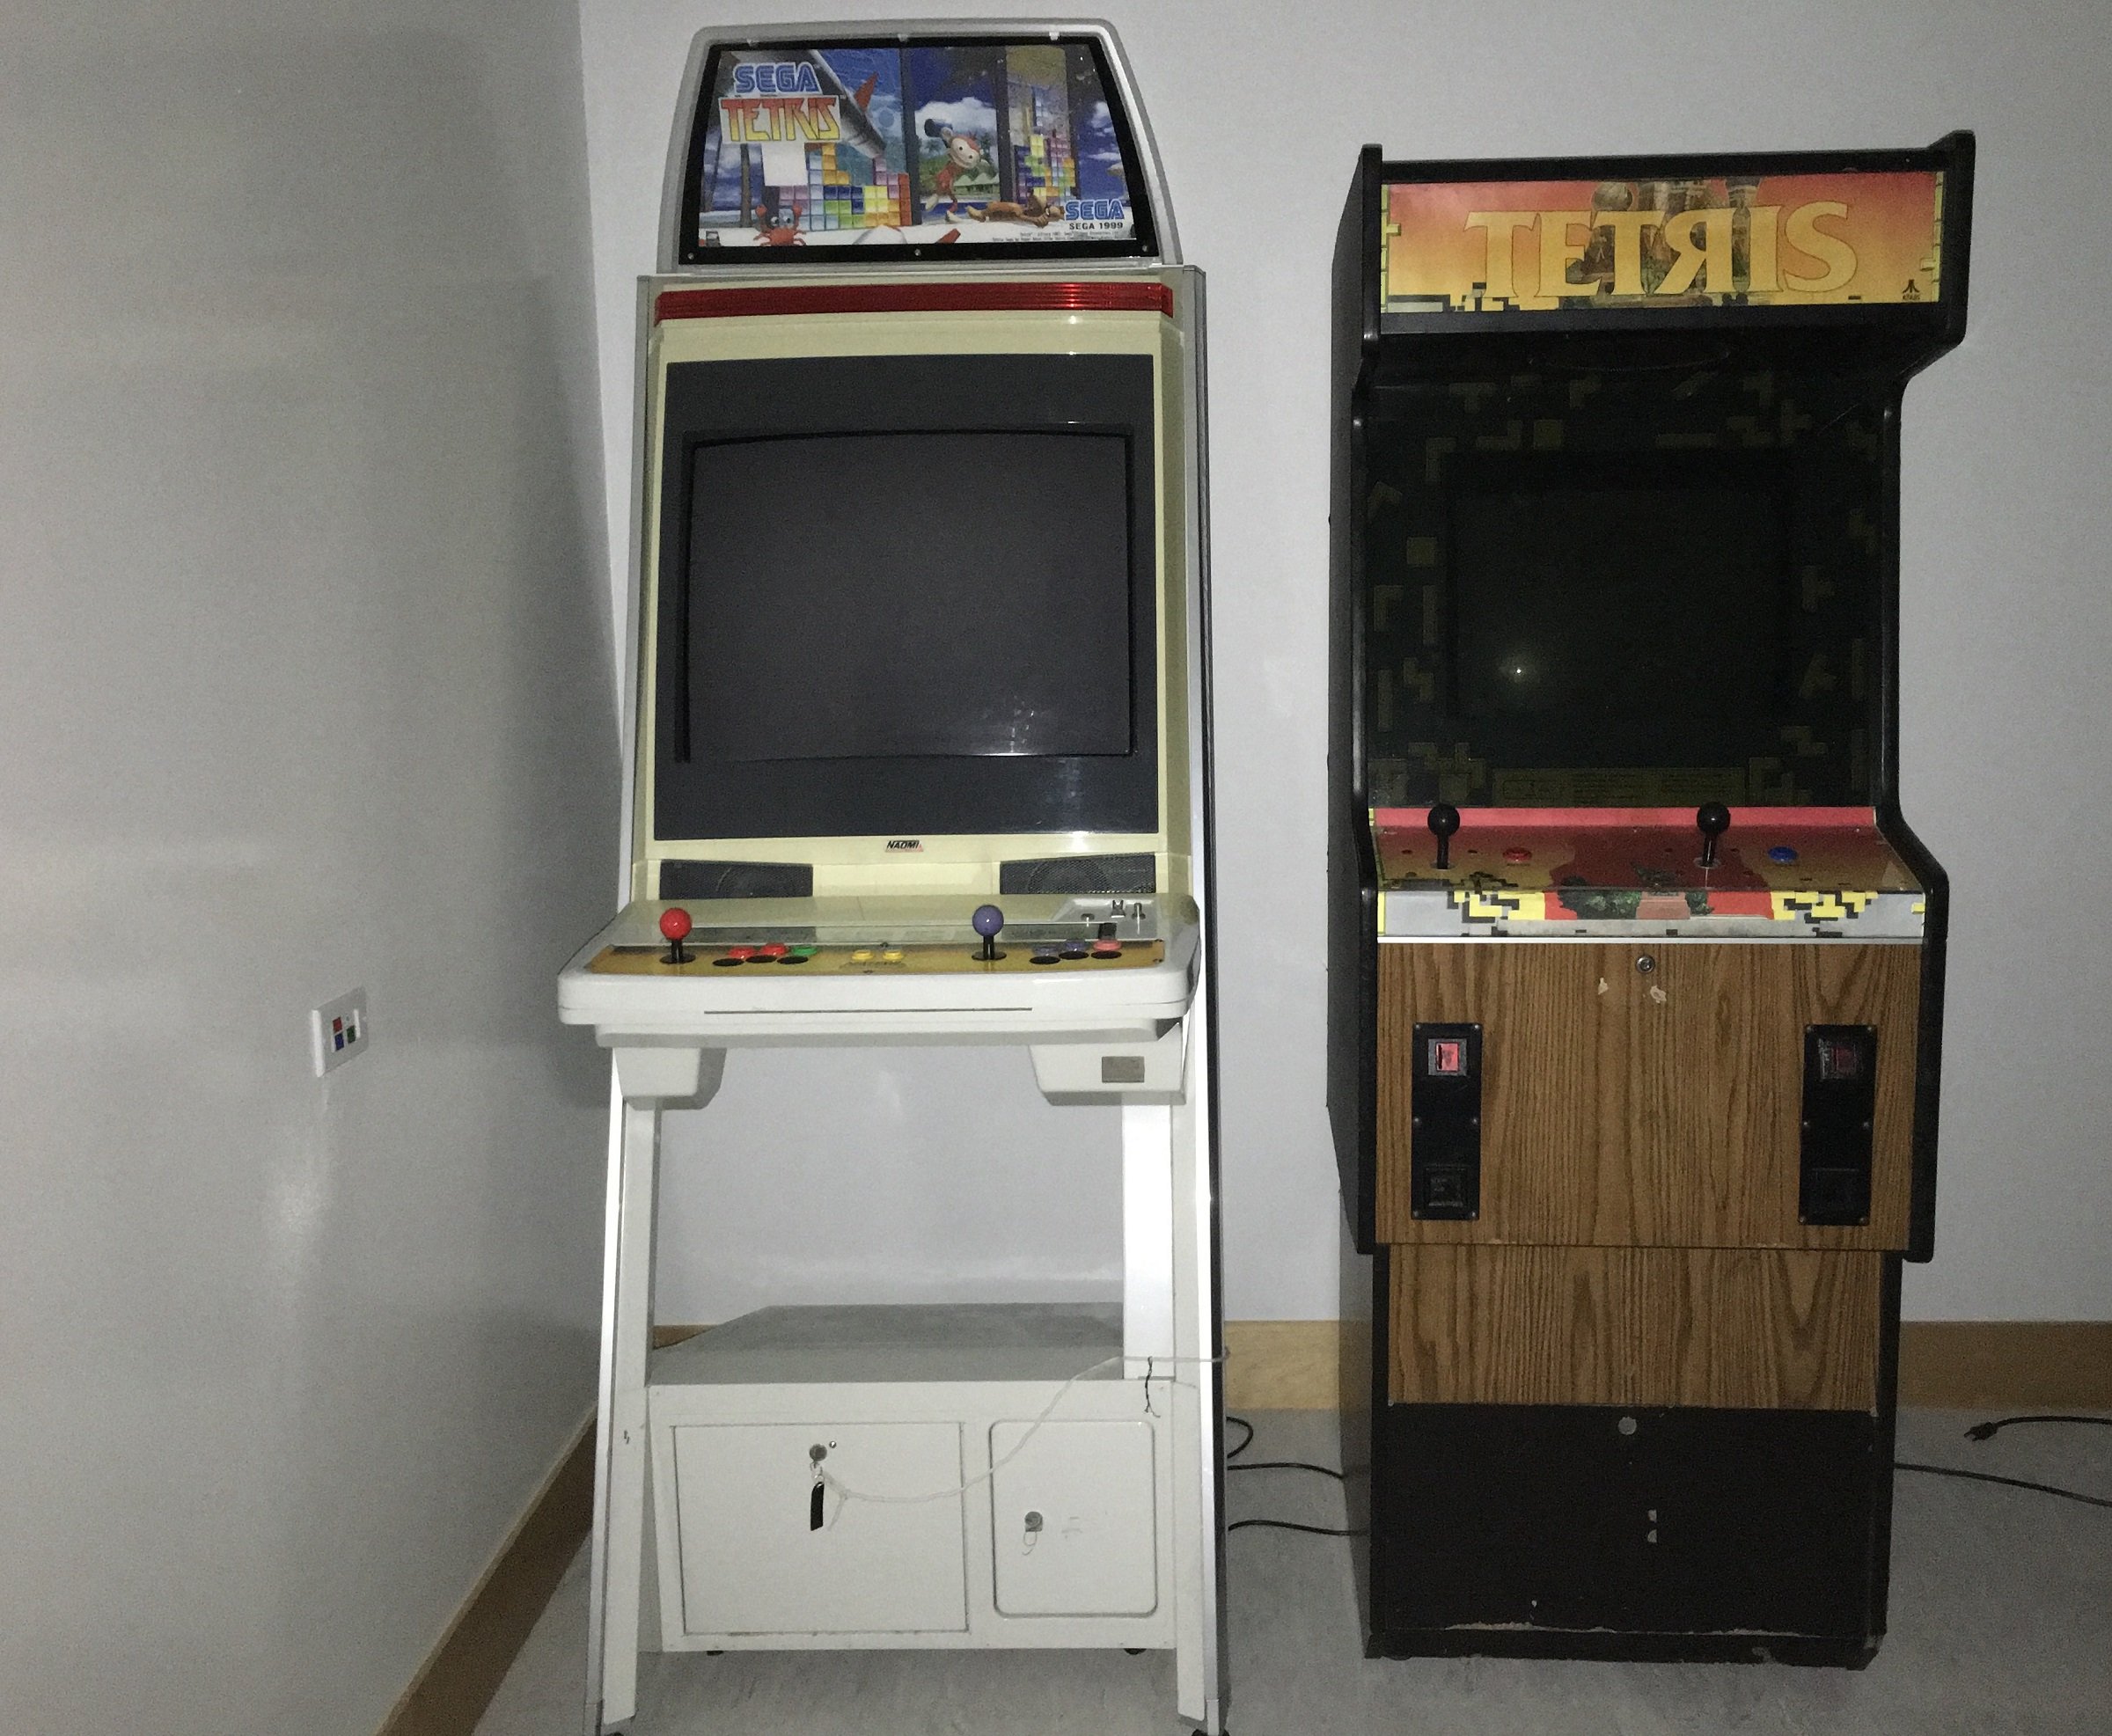 Have You Ever Played Tetris In The Arcade?